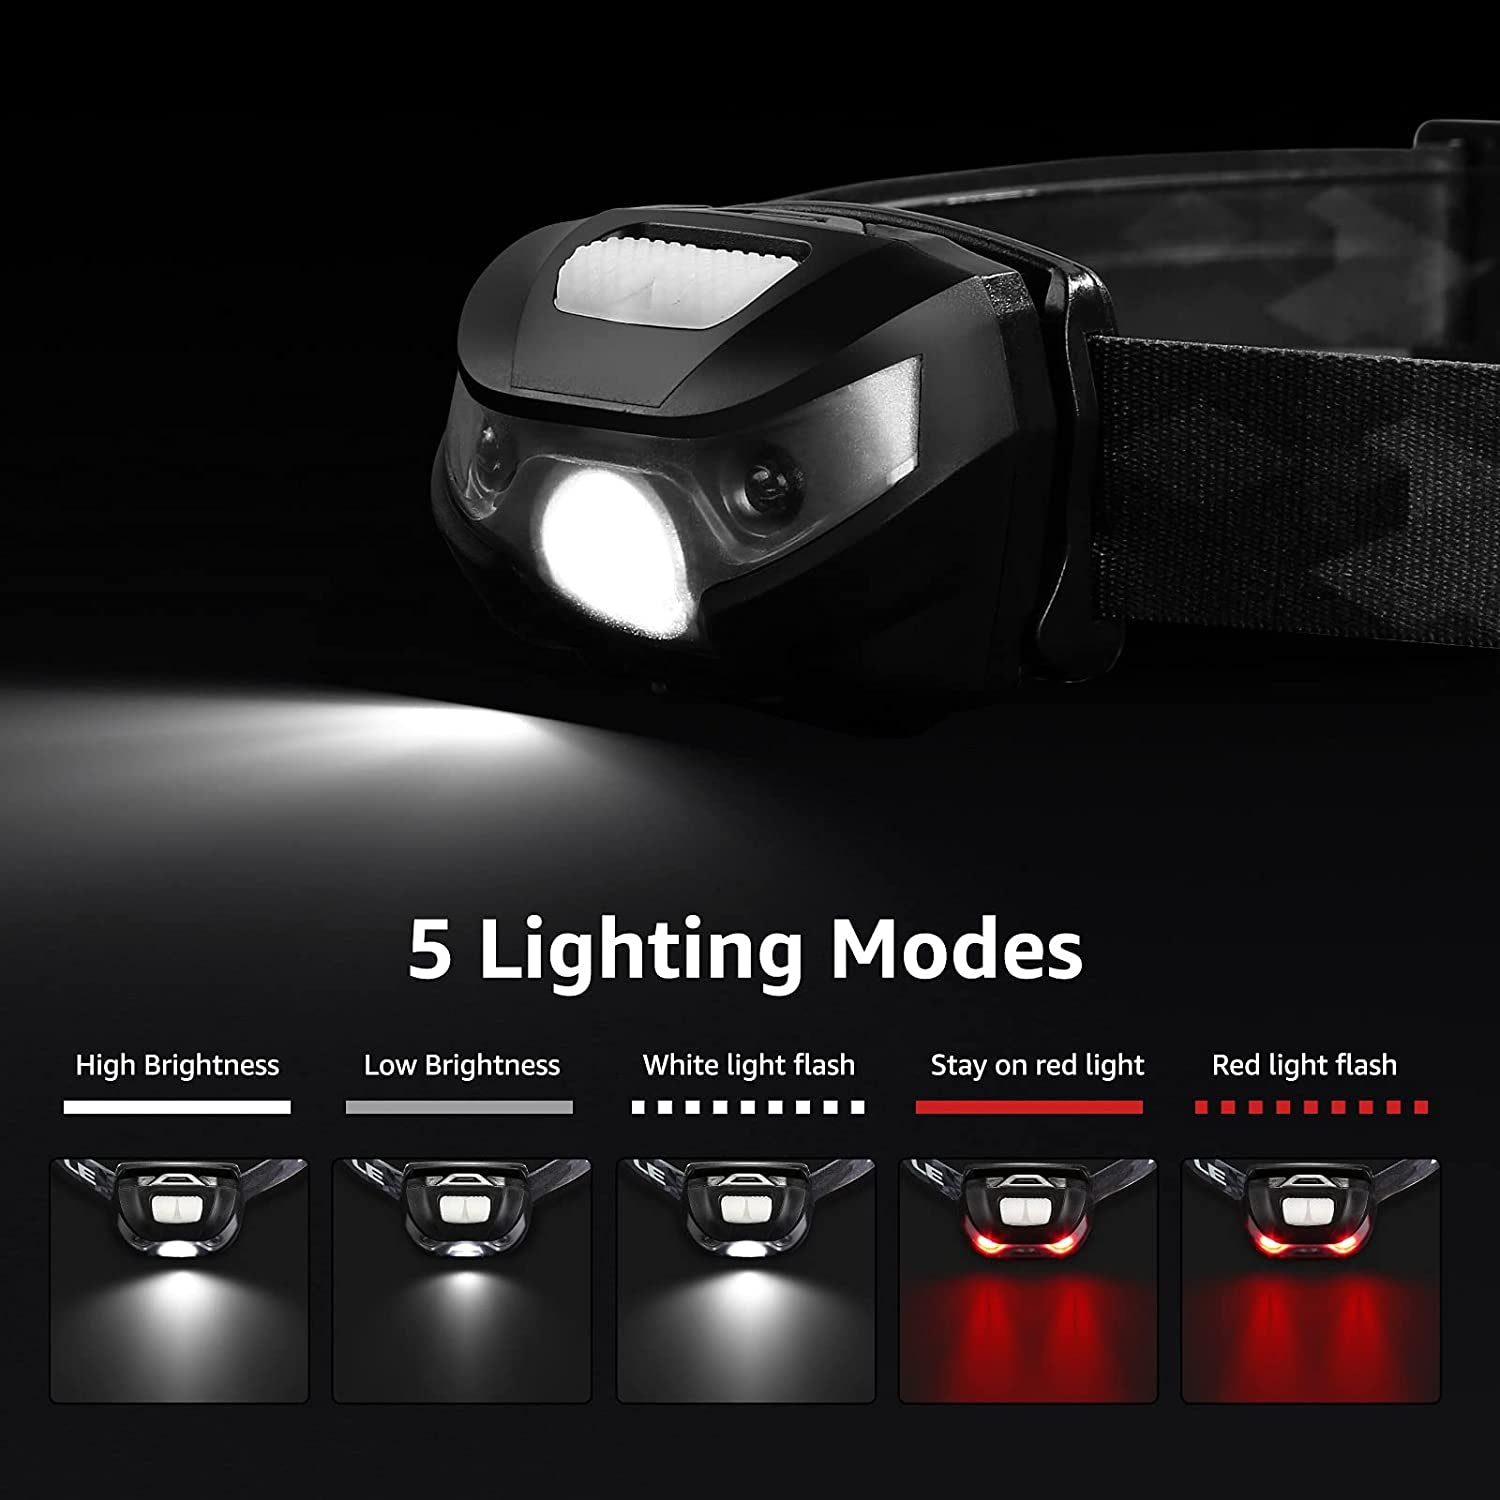 Lighting EVER, LE LED Headlamp Flashlight Rechargeable Headlights, USB Cable Included Red Light 5 Modes Running Jogging Hiking